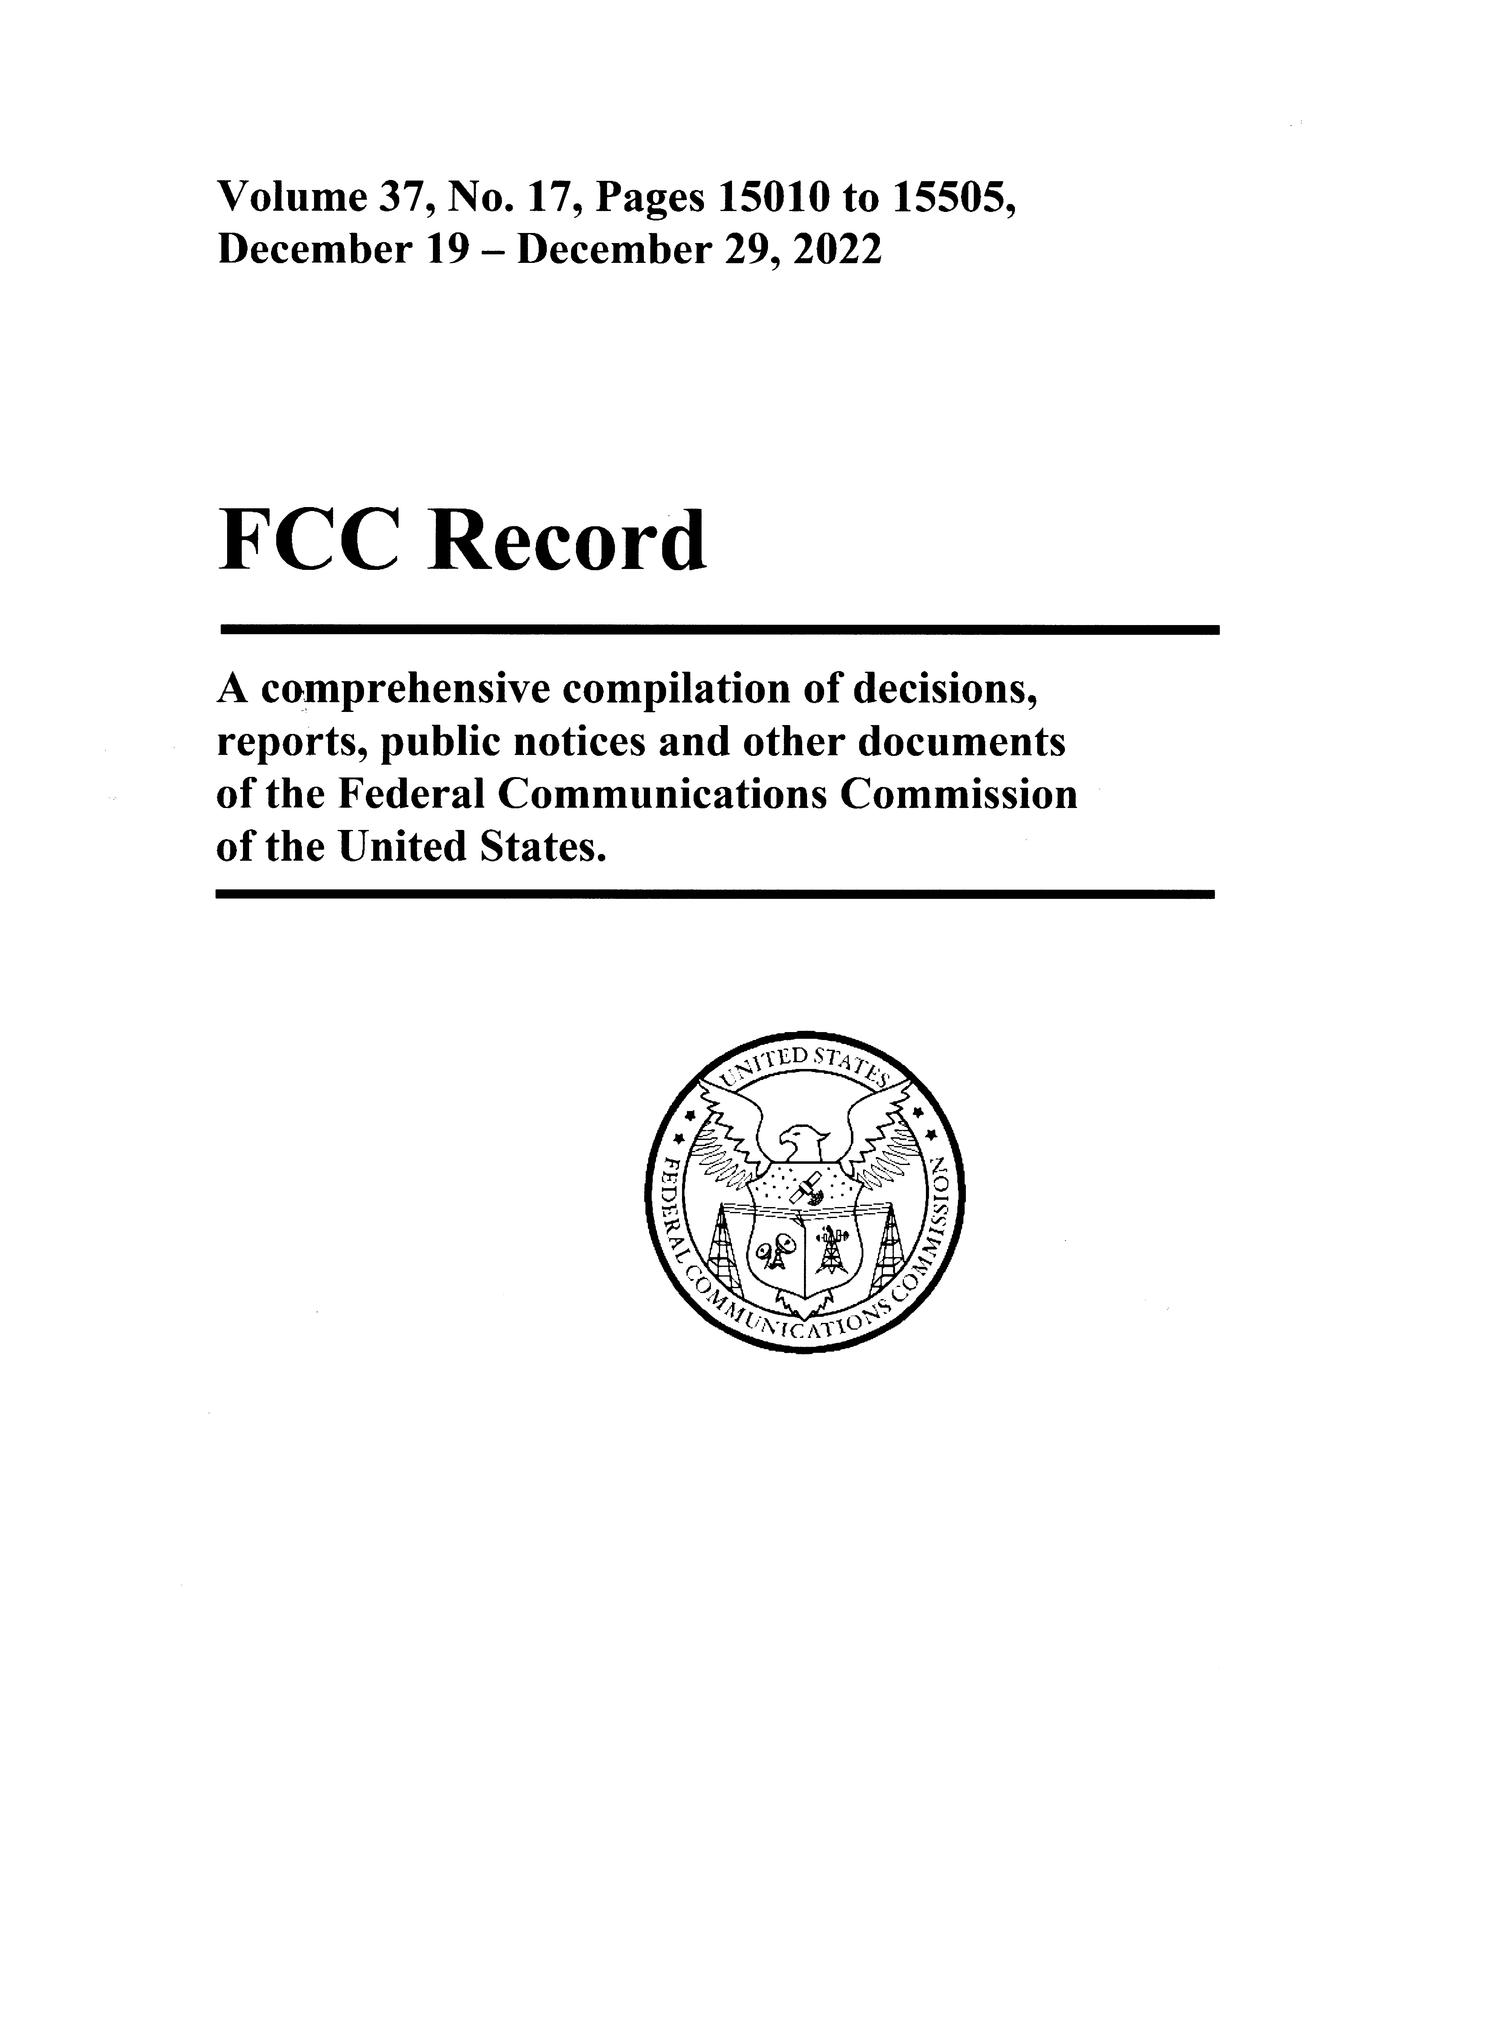 FCC Record, Volume 37, No. 17, Pages 15010 to 15505 December 19 - December 29, 2022
                                                
                                                    Front Cover
                                                